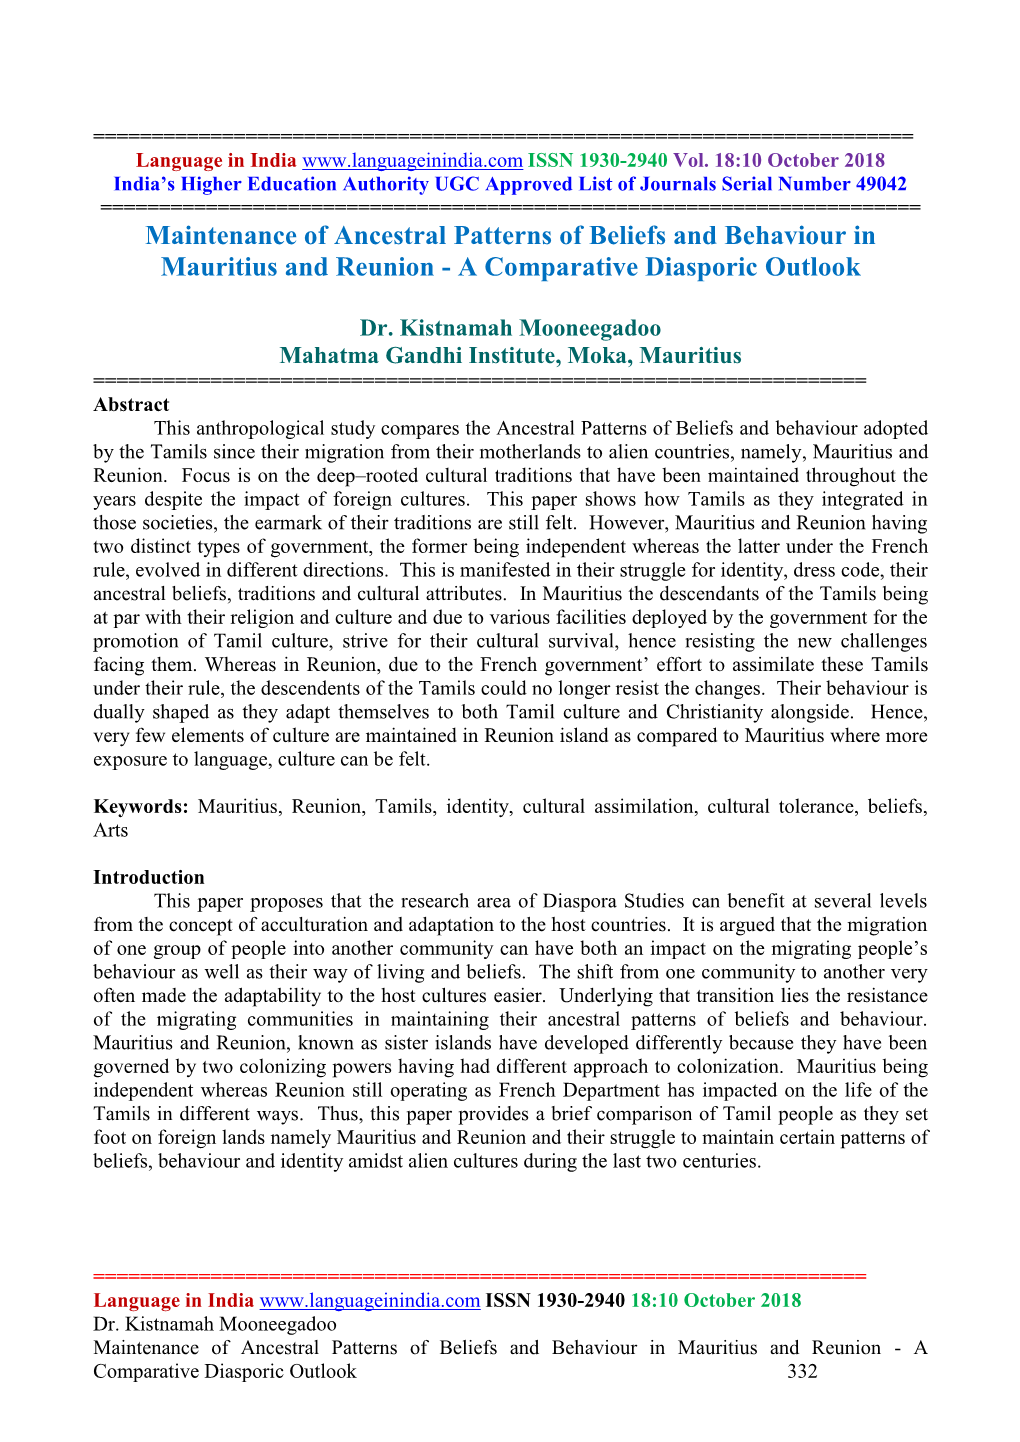 Maintenance of Ancestral Patterns of Beliefs and Behaviour in Mauritius and Reunion - a Comparative Diasporic Outlook